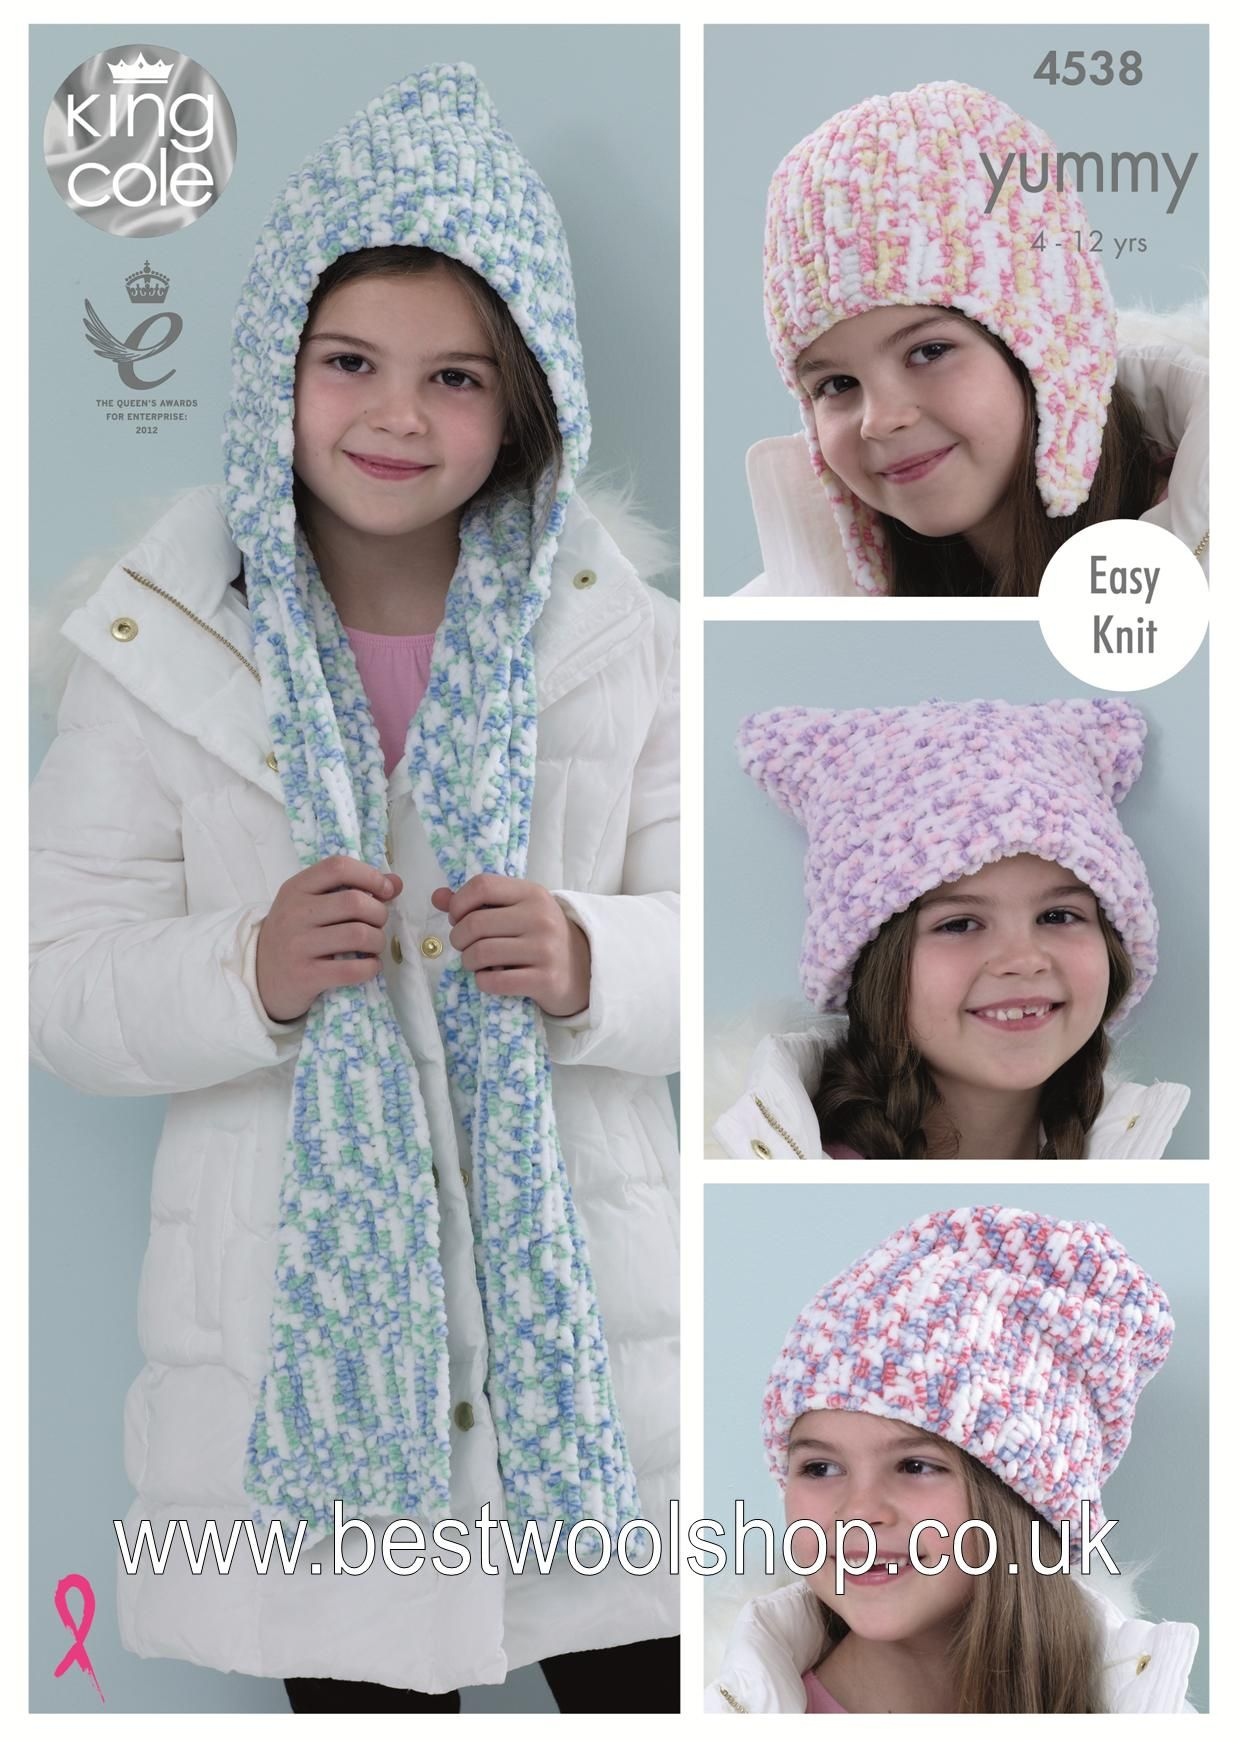 Knitted Hood Scarf Pattern 4538 King Cole Yummy Chunky Easy Knit Hooded Scarf Hat Knitting Pattern 4 Options To Fit 4 To 12 Years